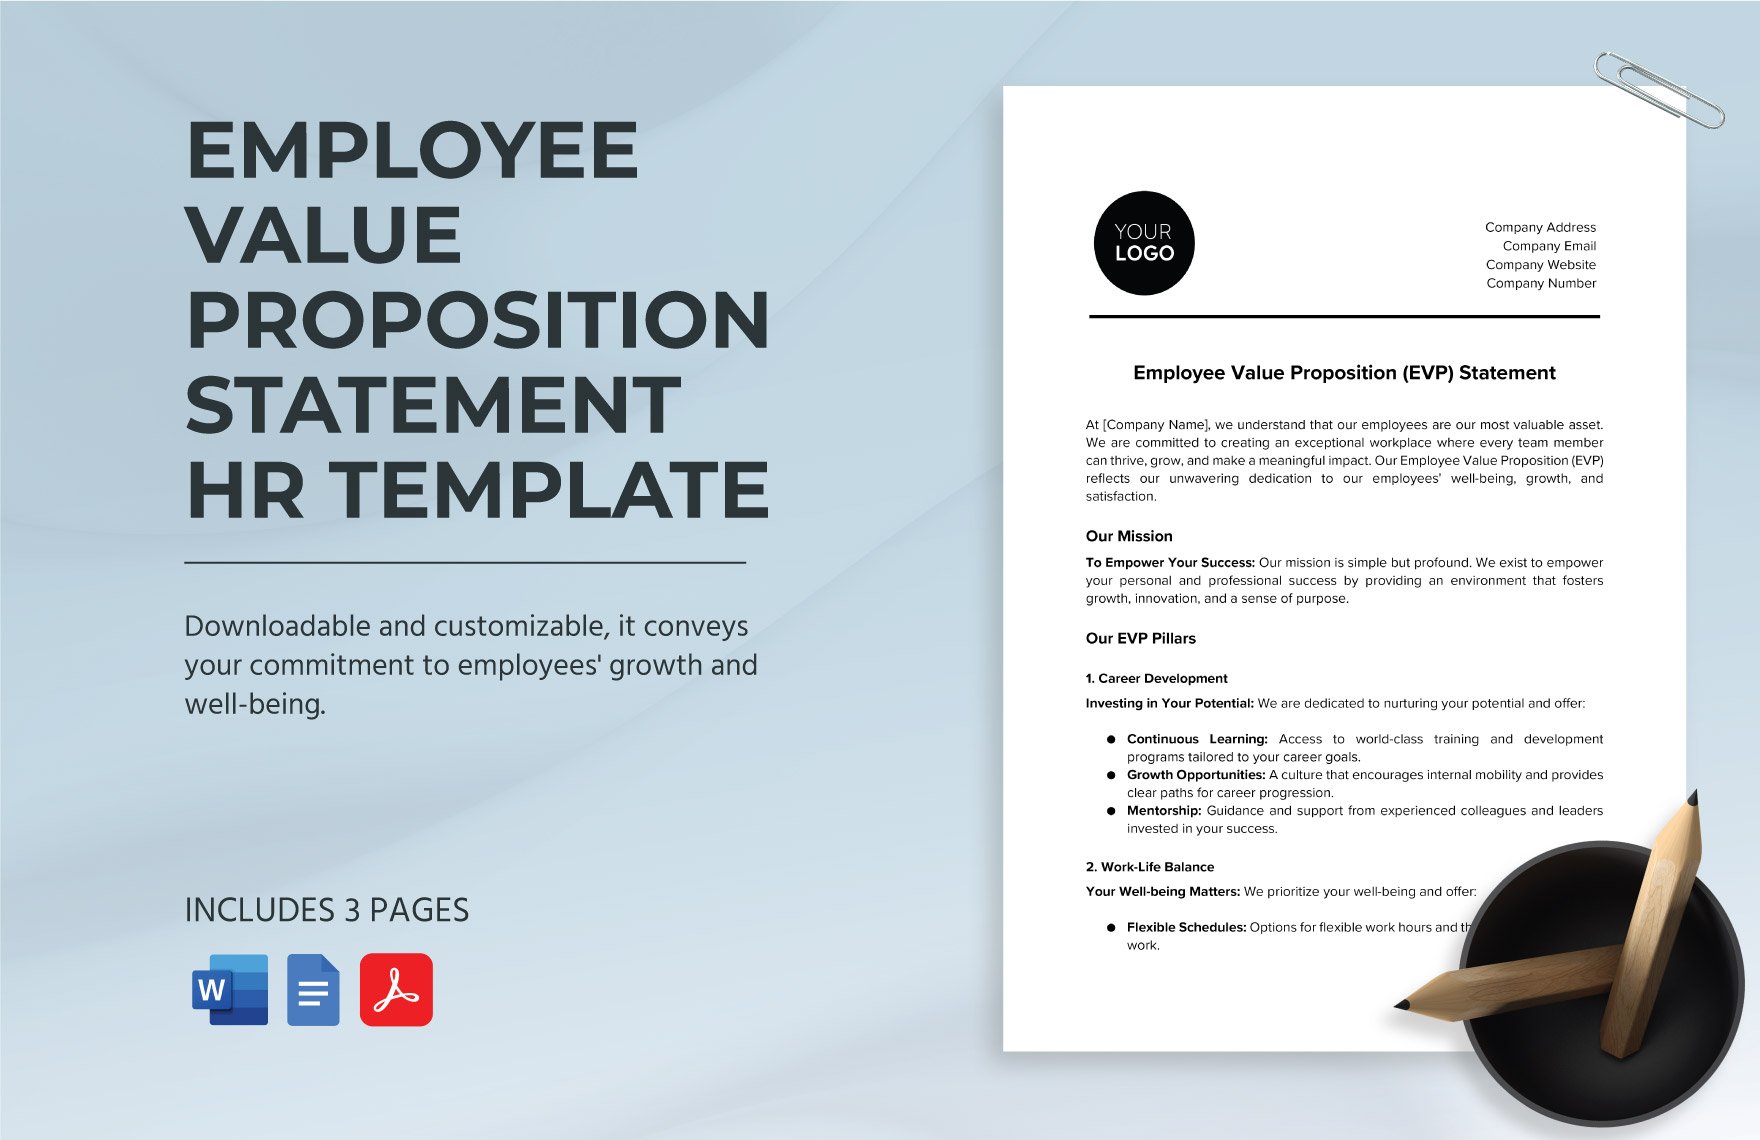 Employee Value Proposition Statement HR Template